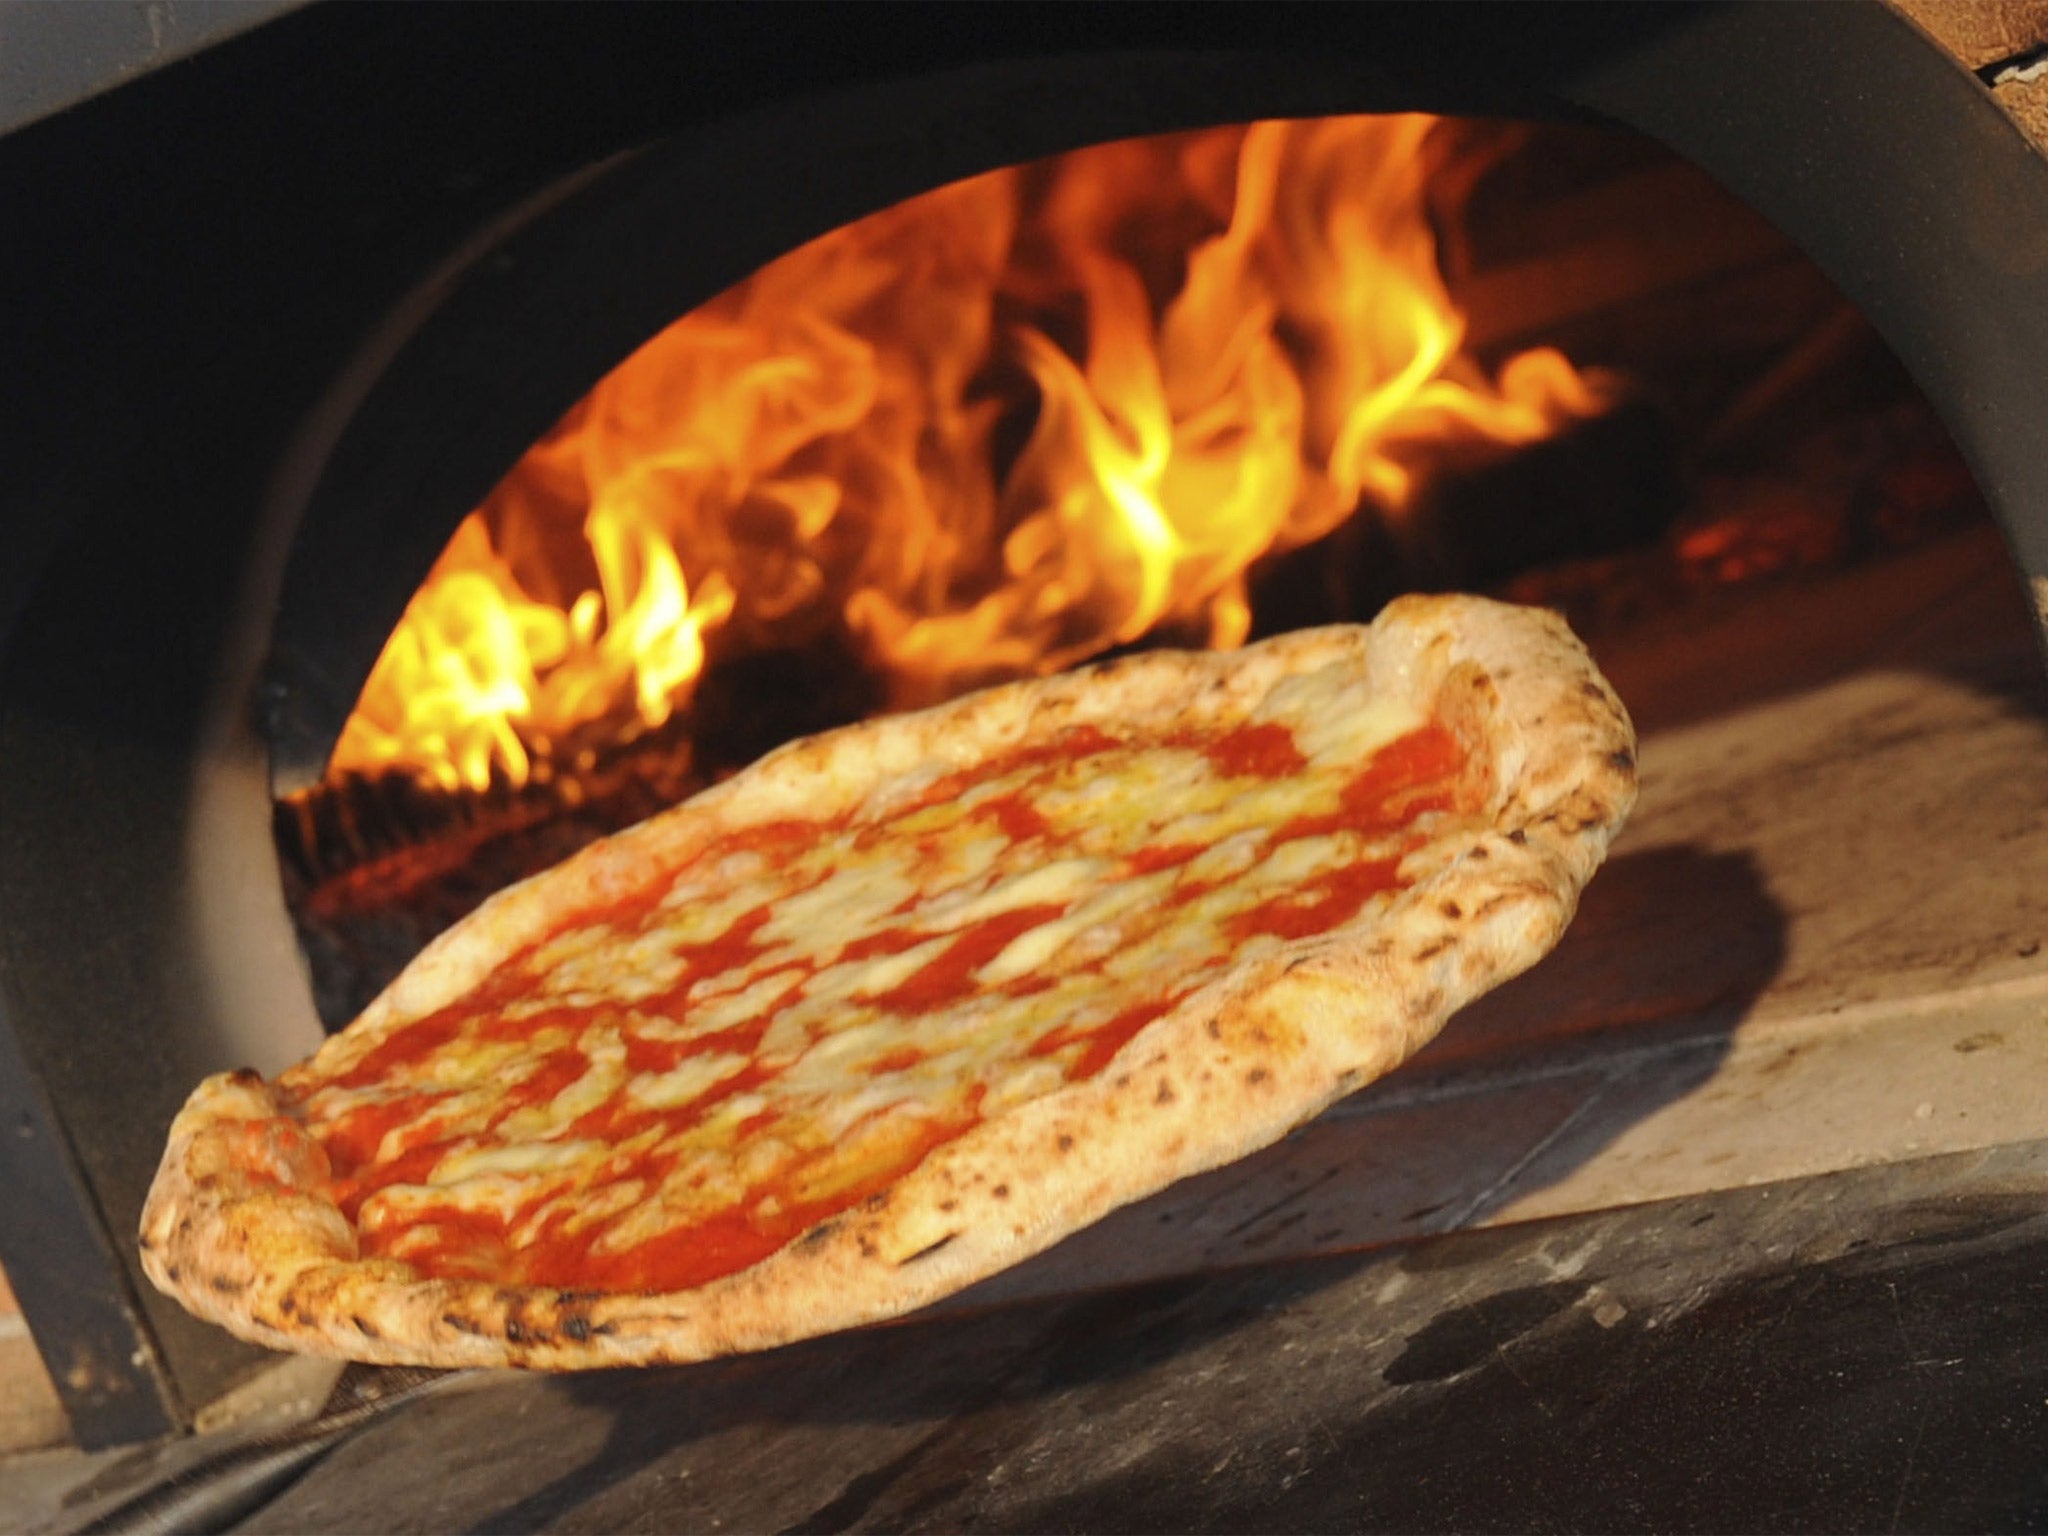 The Margherita is regarded as the authentic Naples pizza